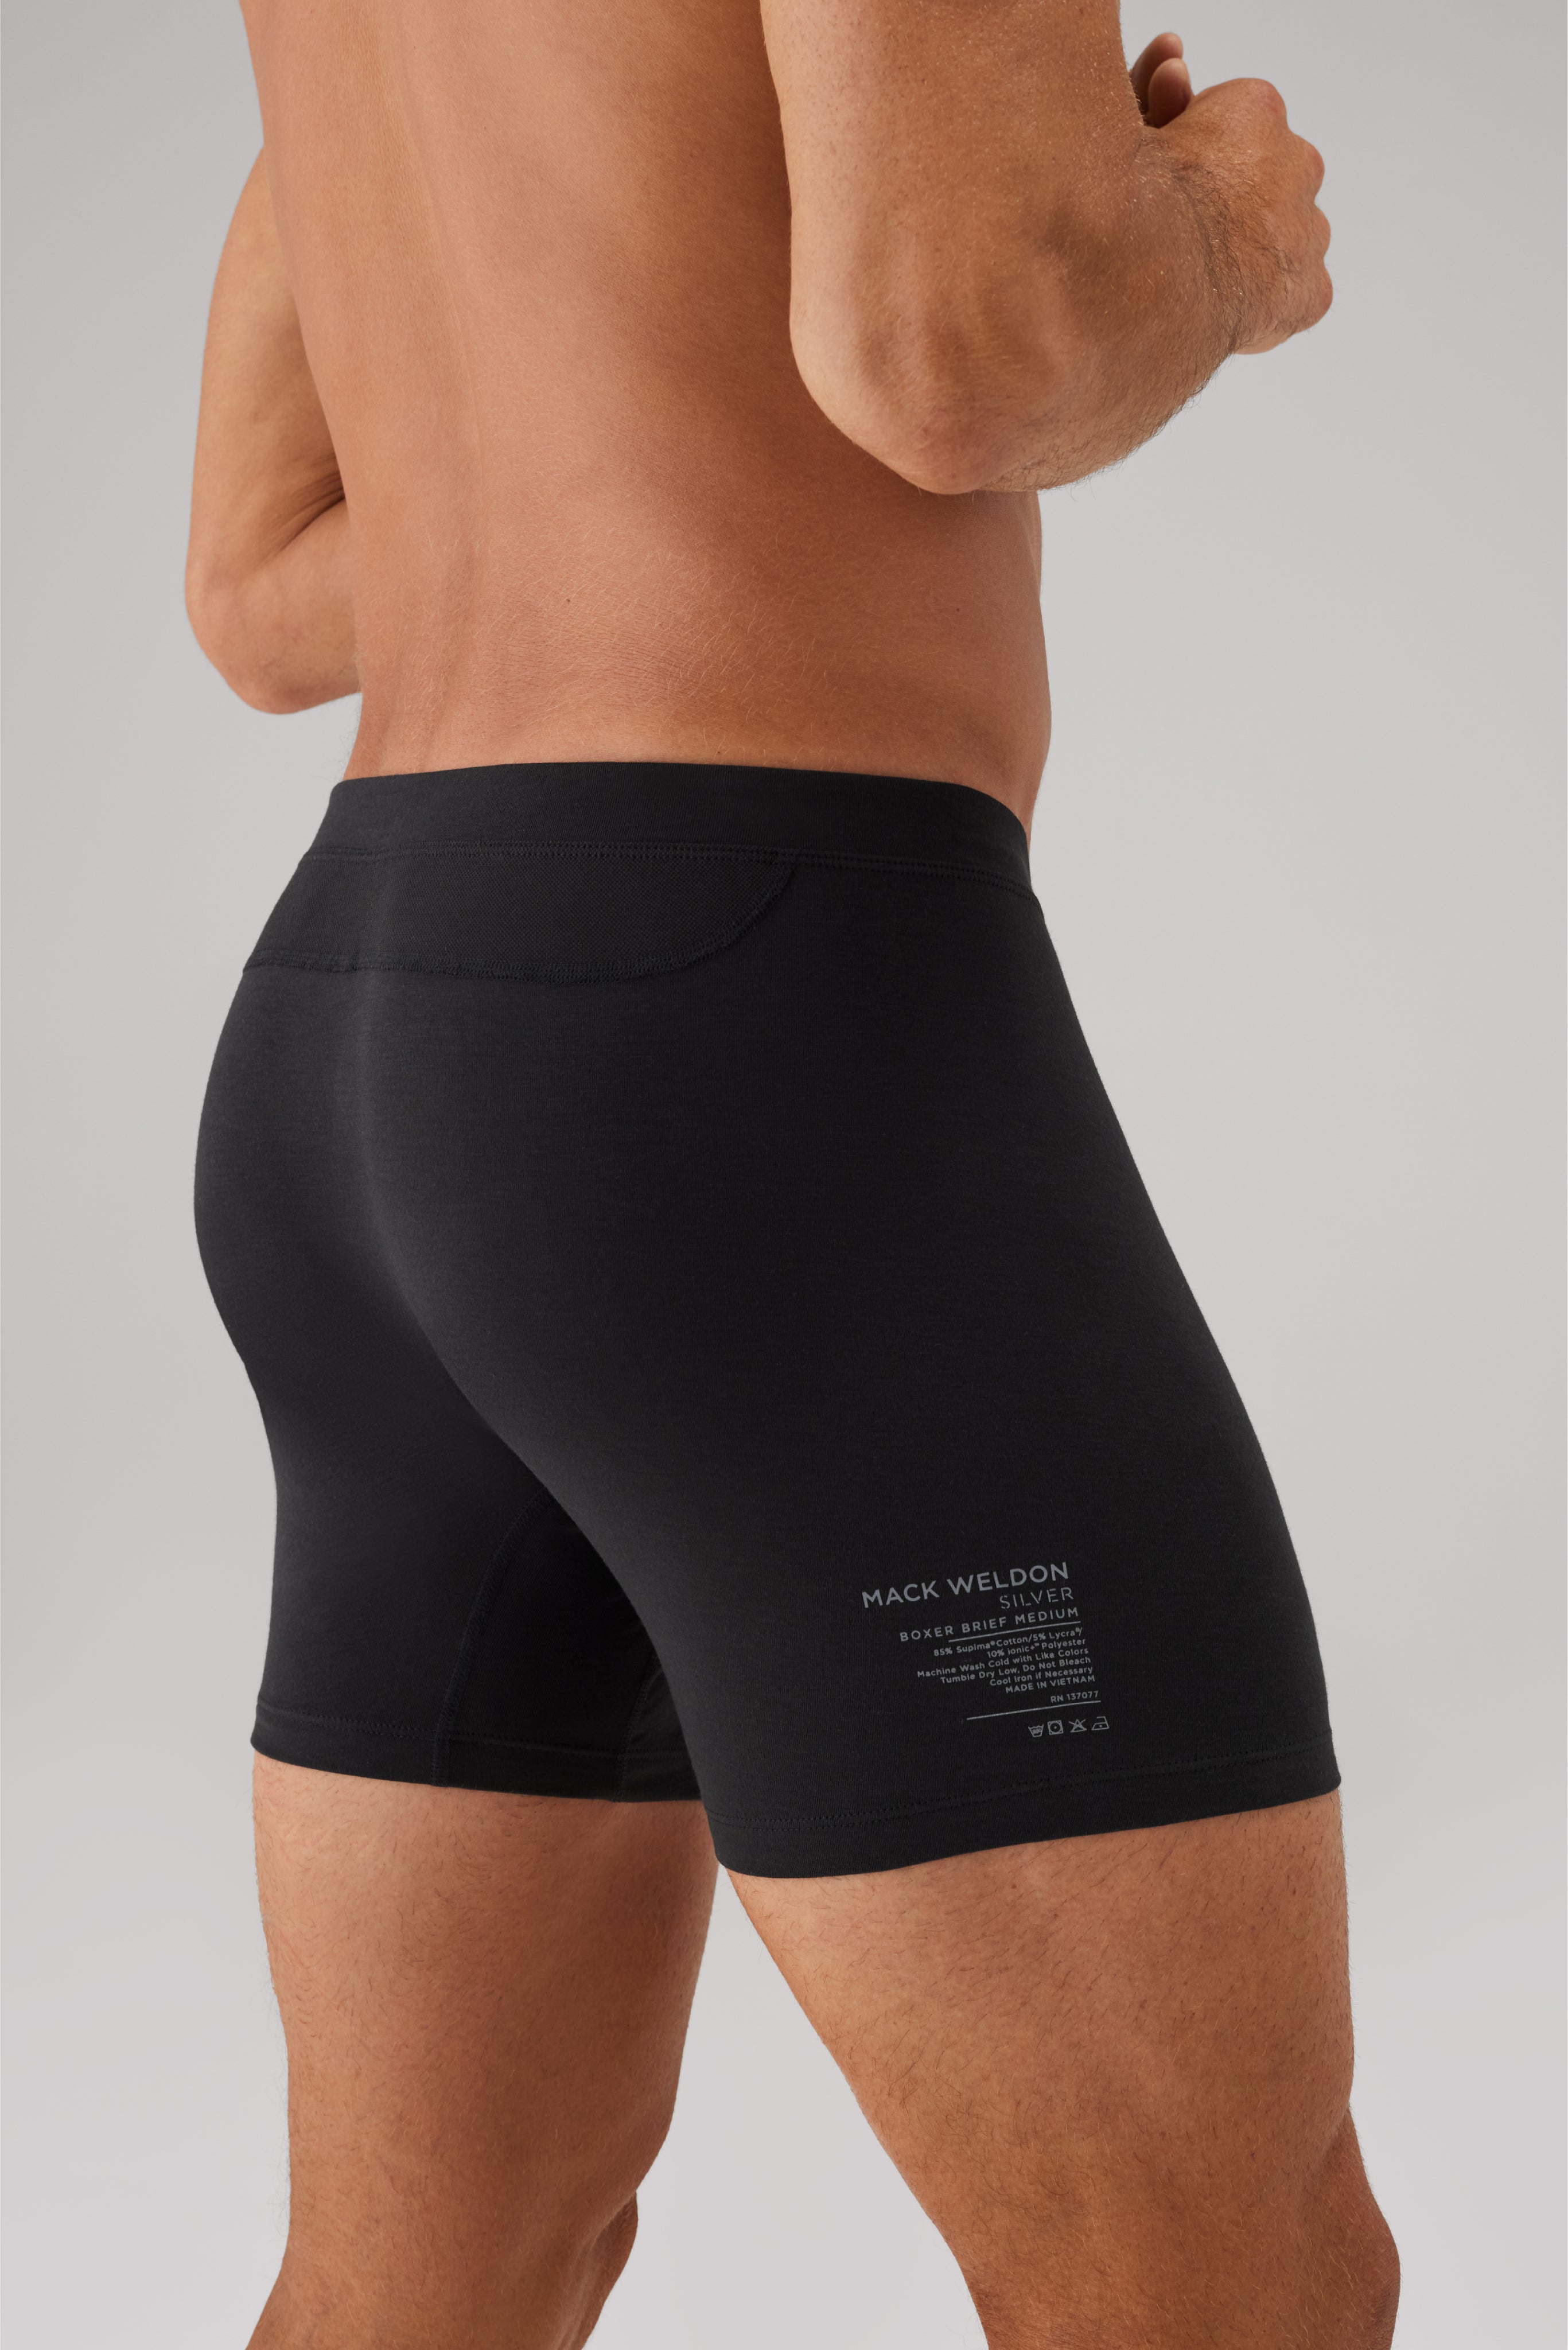 3-Pack SILVER Boxer Briefs Classic Combo